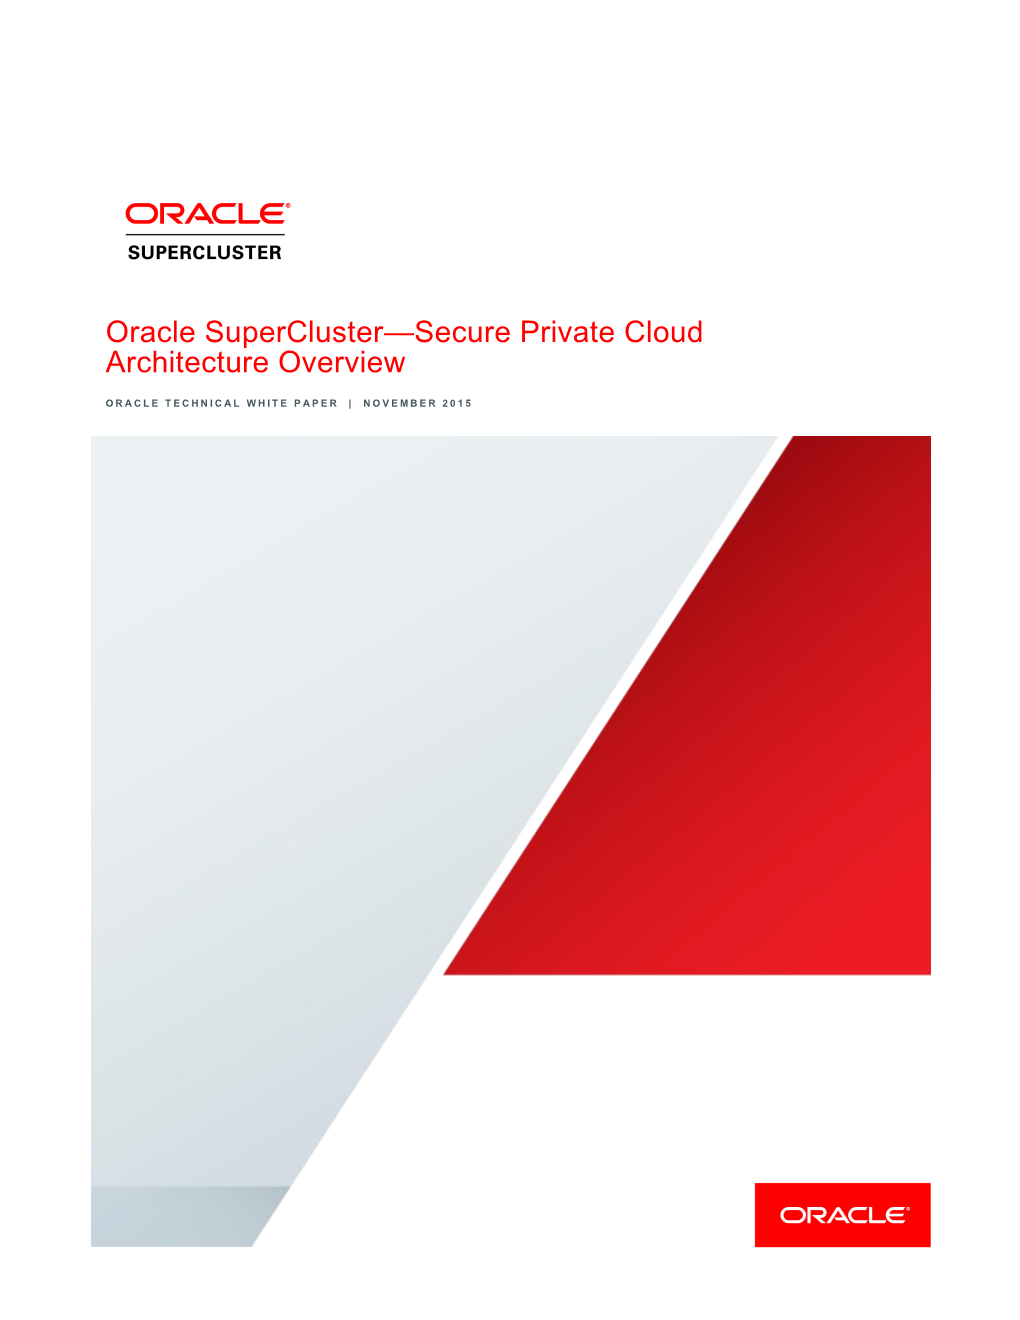 Oracle Supercluster—Secure Private Cloud Archiecture